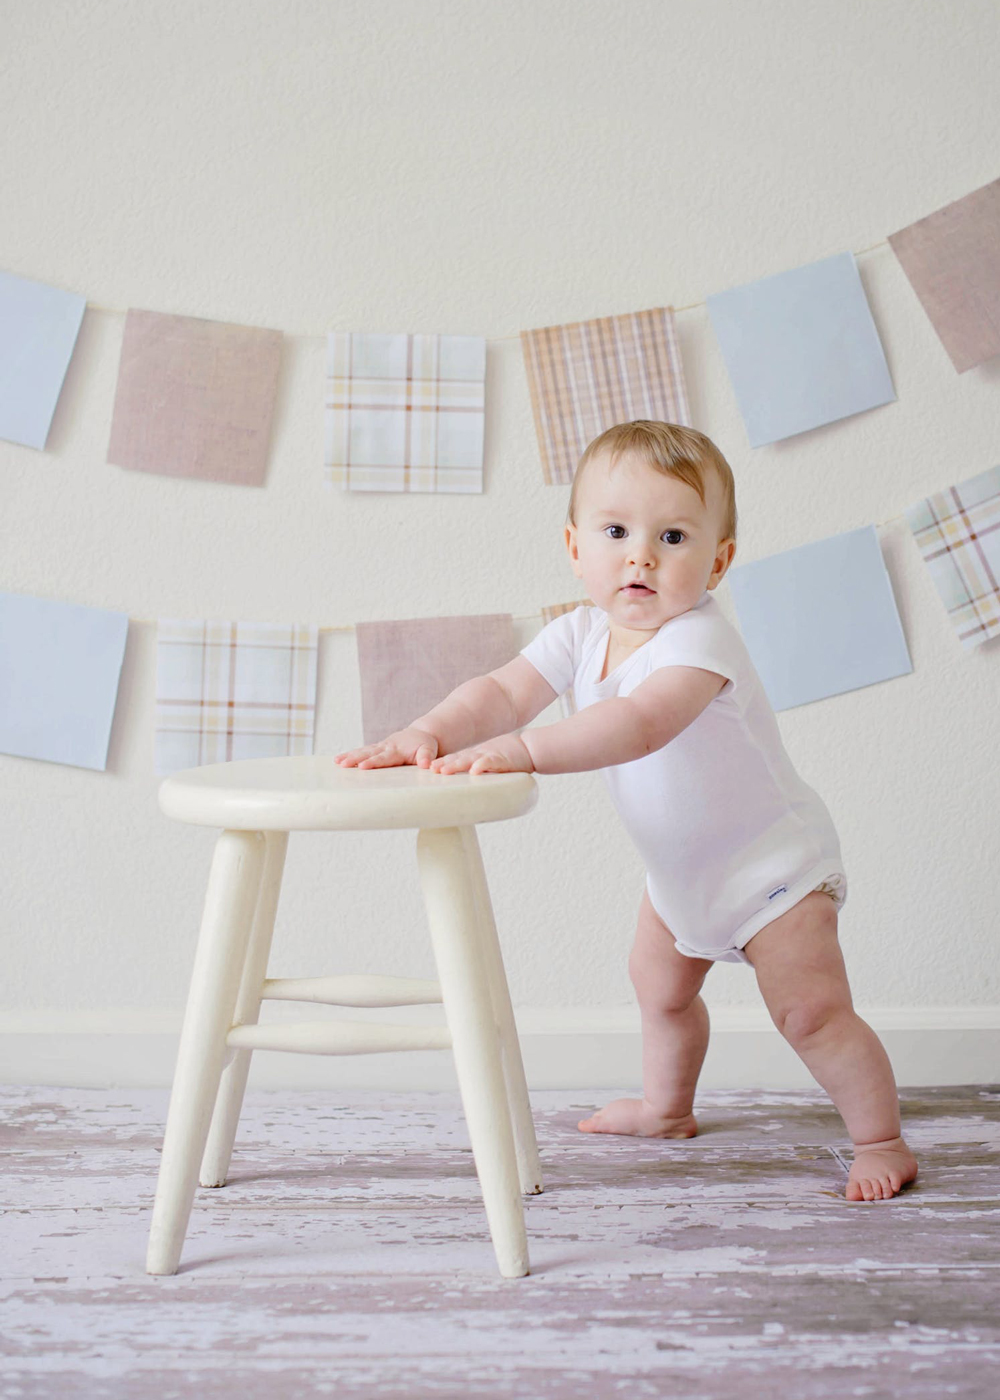 Baby propping himself up with painted white stool and bunting in the background